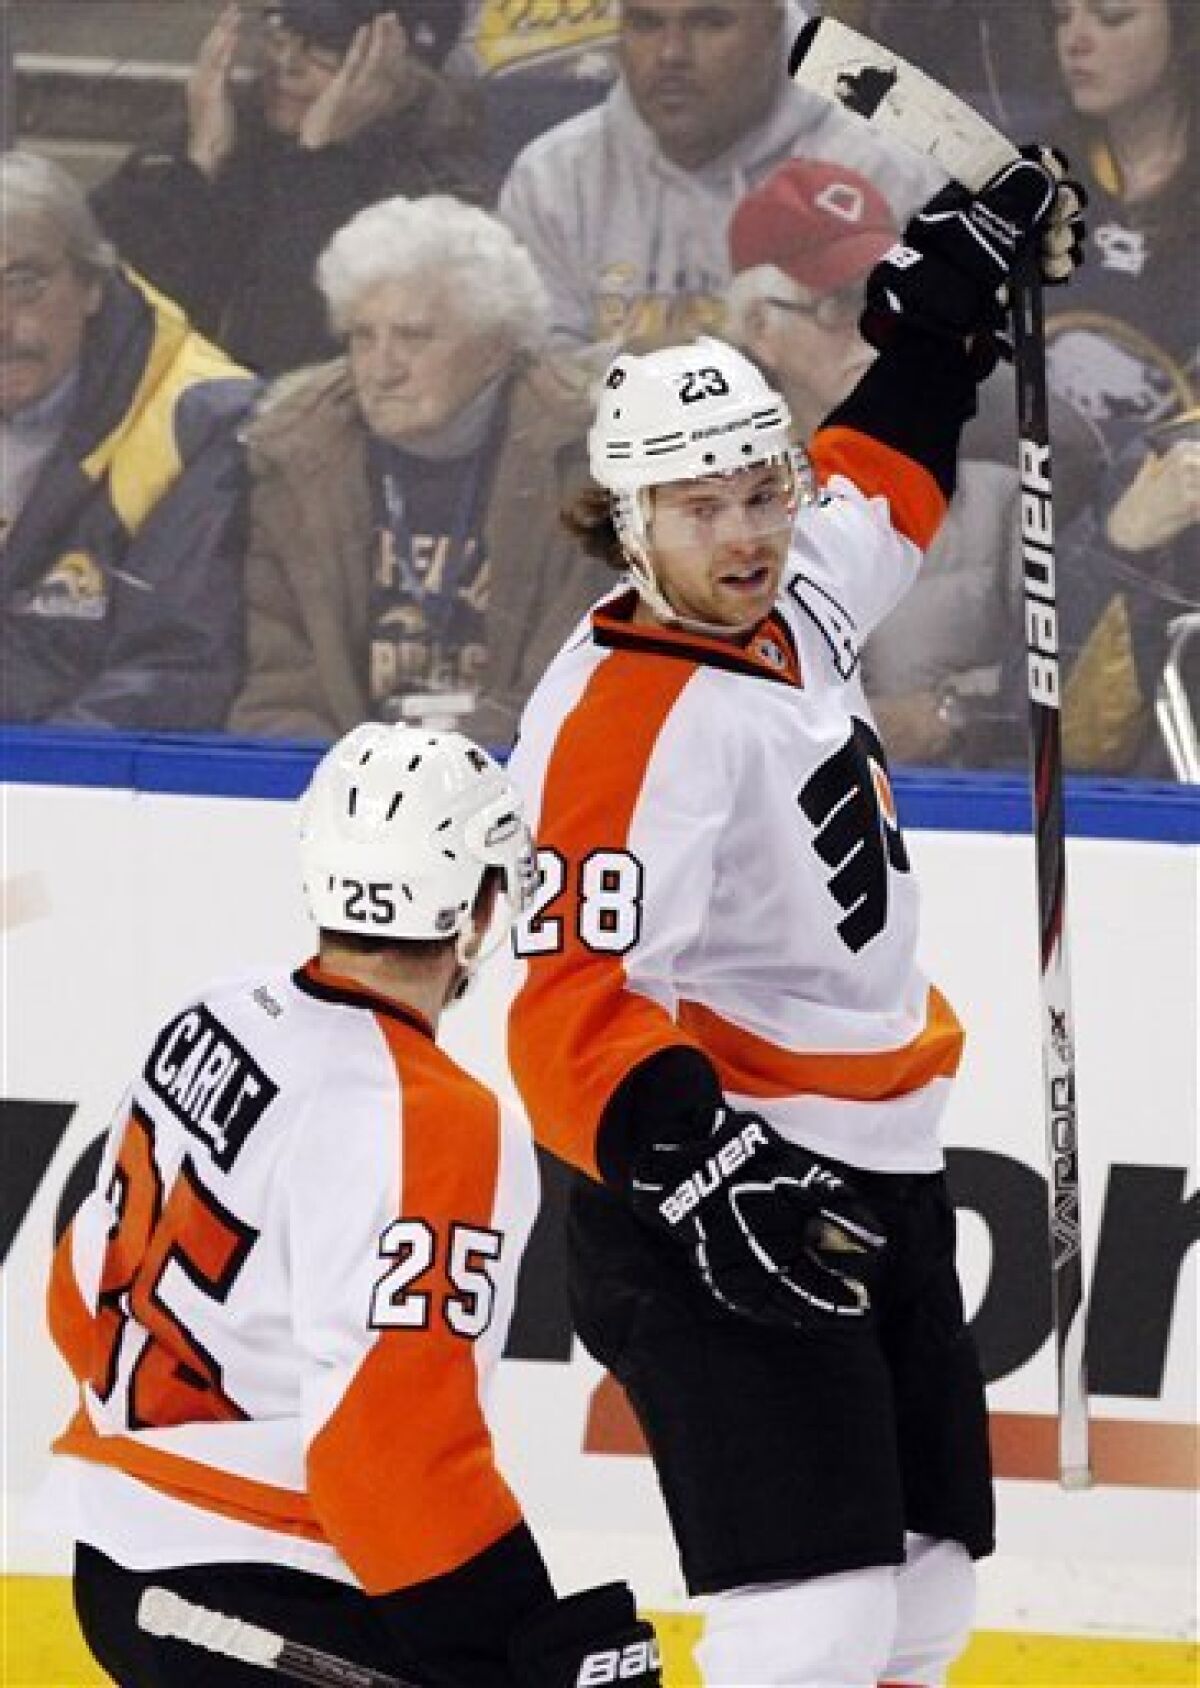 Philadelphia Flyers' Claude Giroux (28) celebrates his game-winning goal with teammate Erik Gustaffsson (25), of Sweden, during the overtime period of an NHL hockey game against the Buffalo Sabres in Buffalo, N.Y., Wednesday, Dec. 7, 2011. The Flyers won 5-4. (AP Photo/Derek Gee)